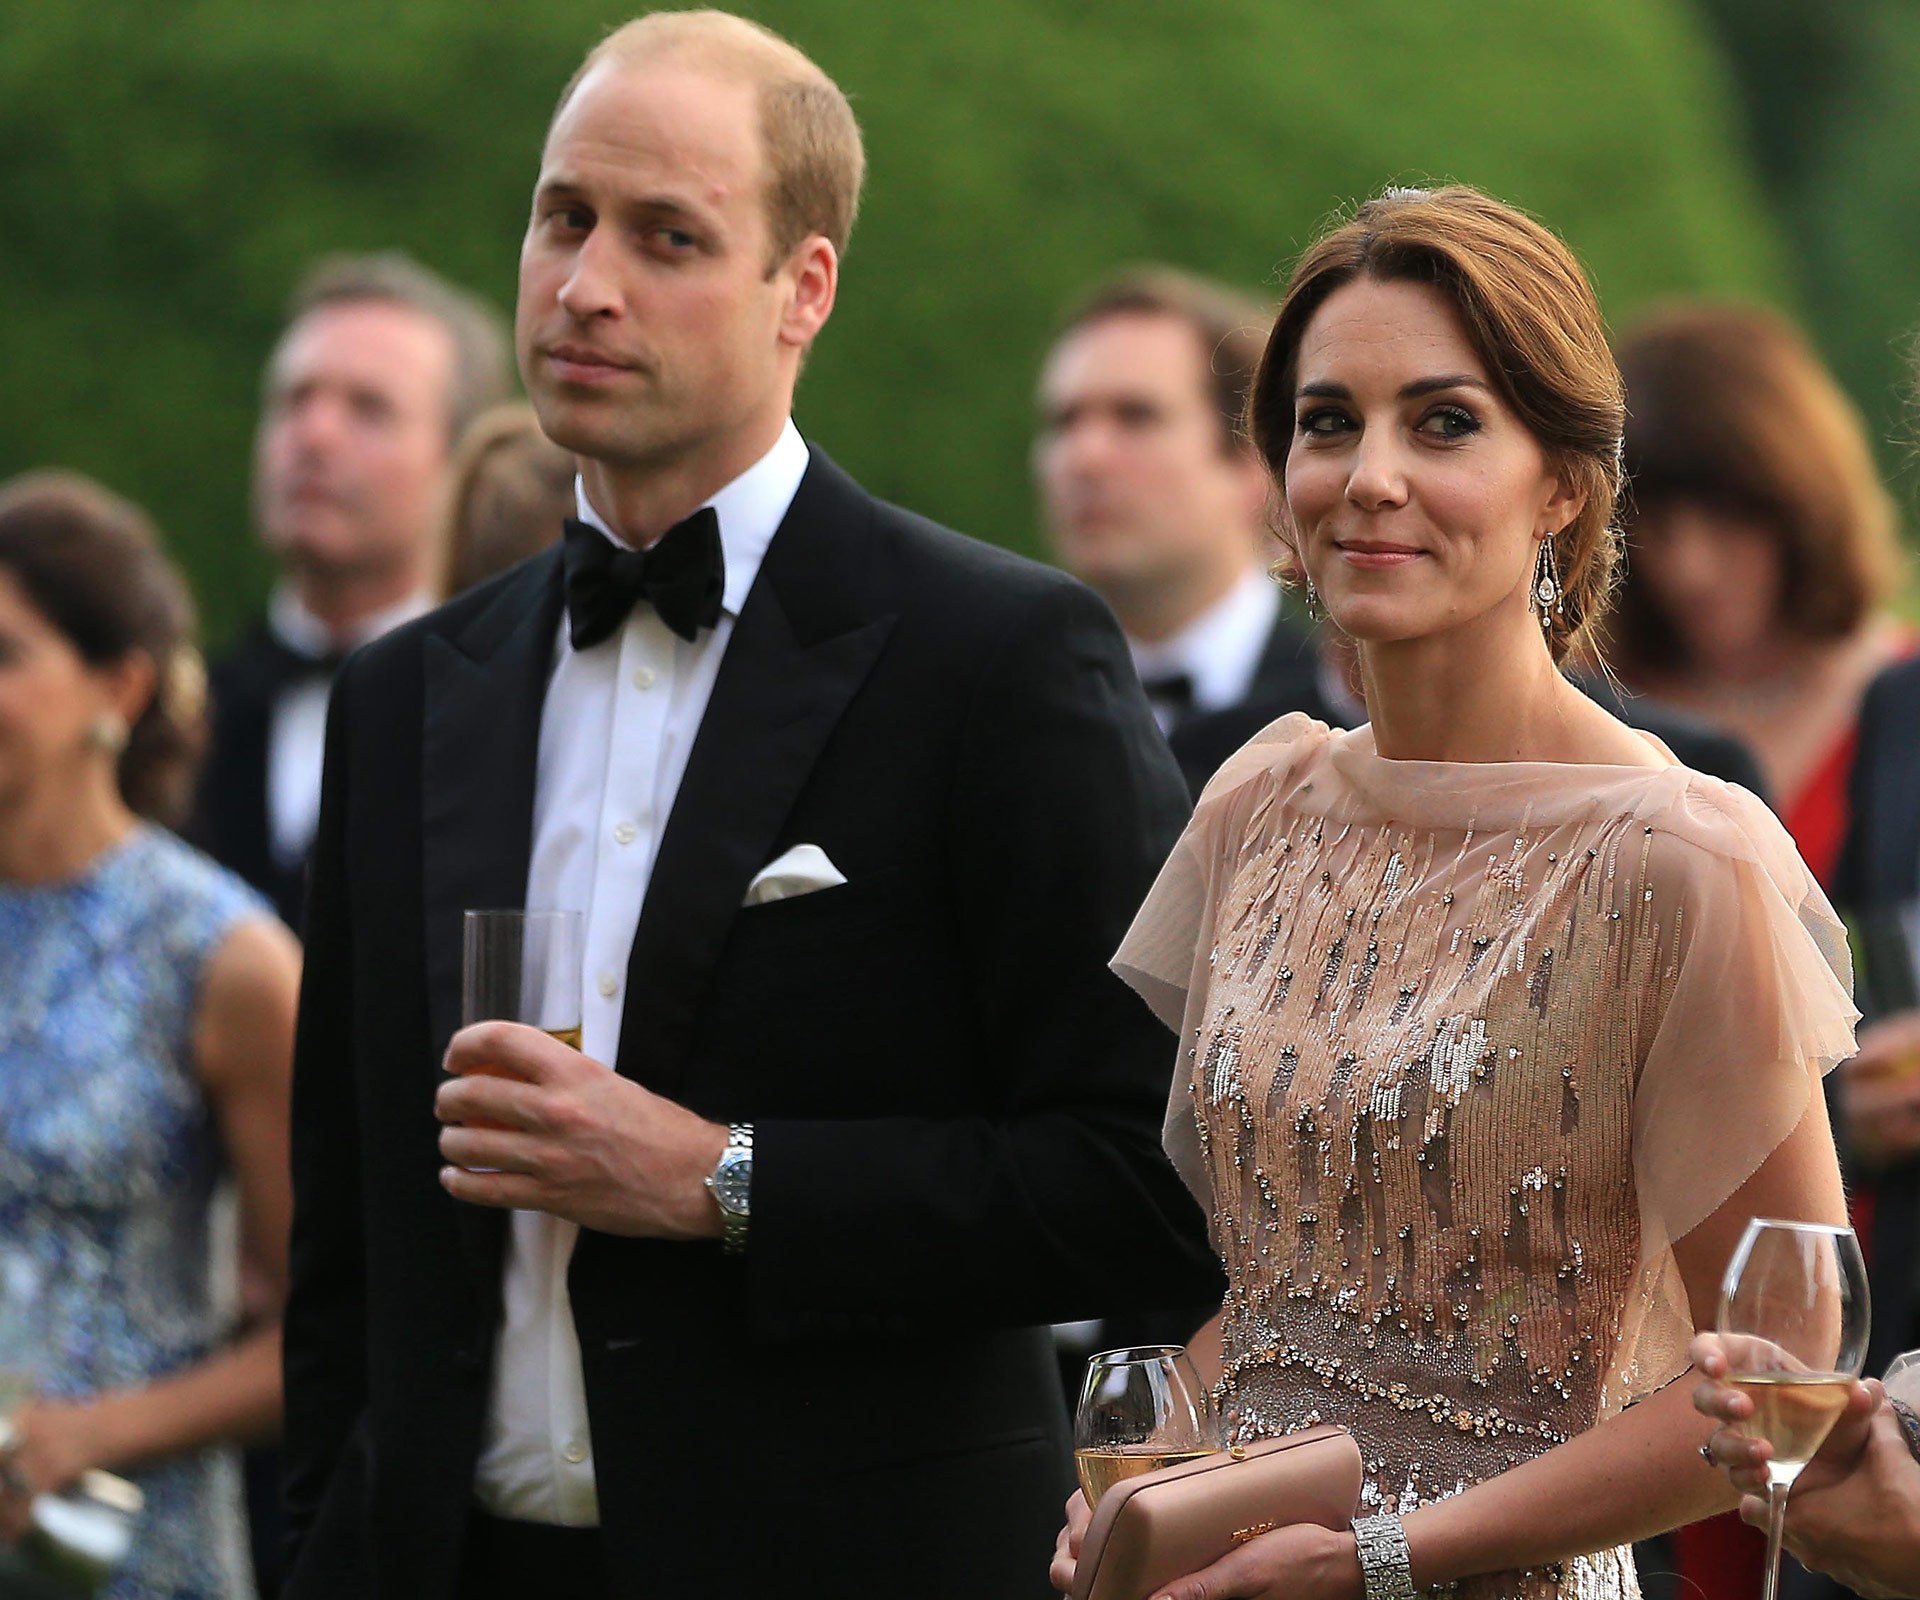 Prince William jokes about Duchess Catherine’s cooking